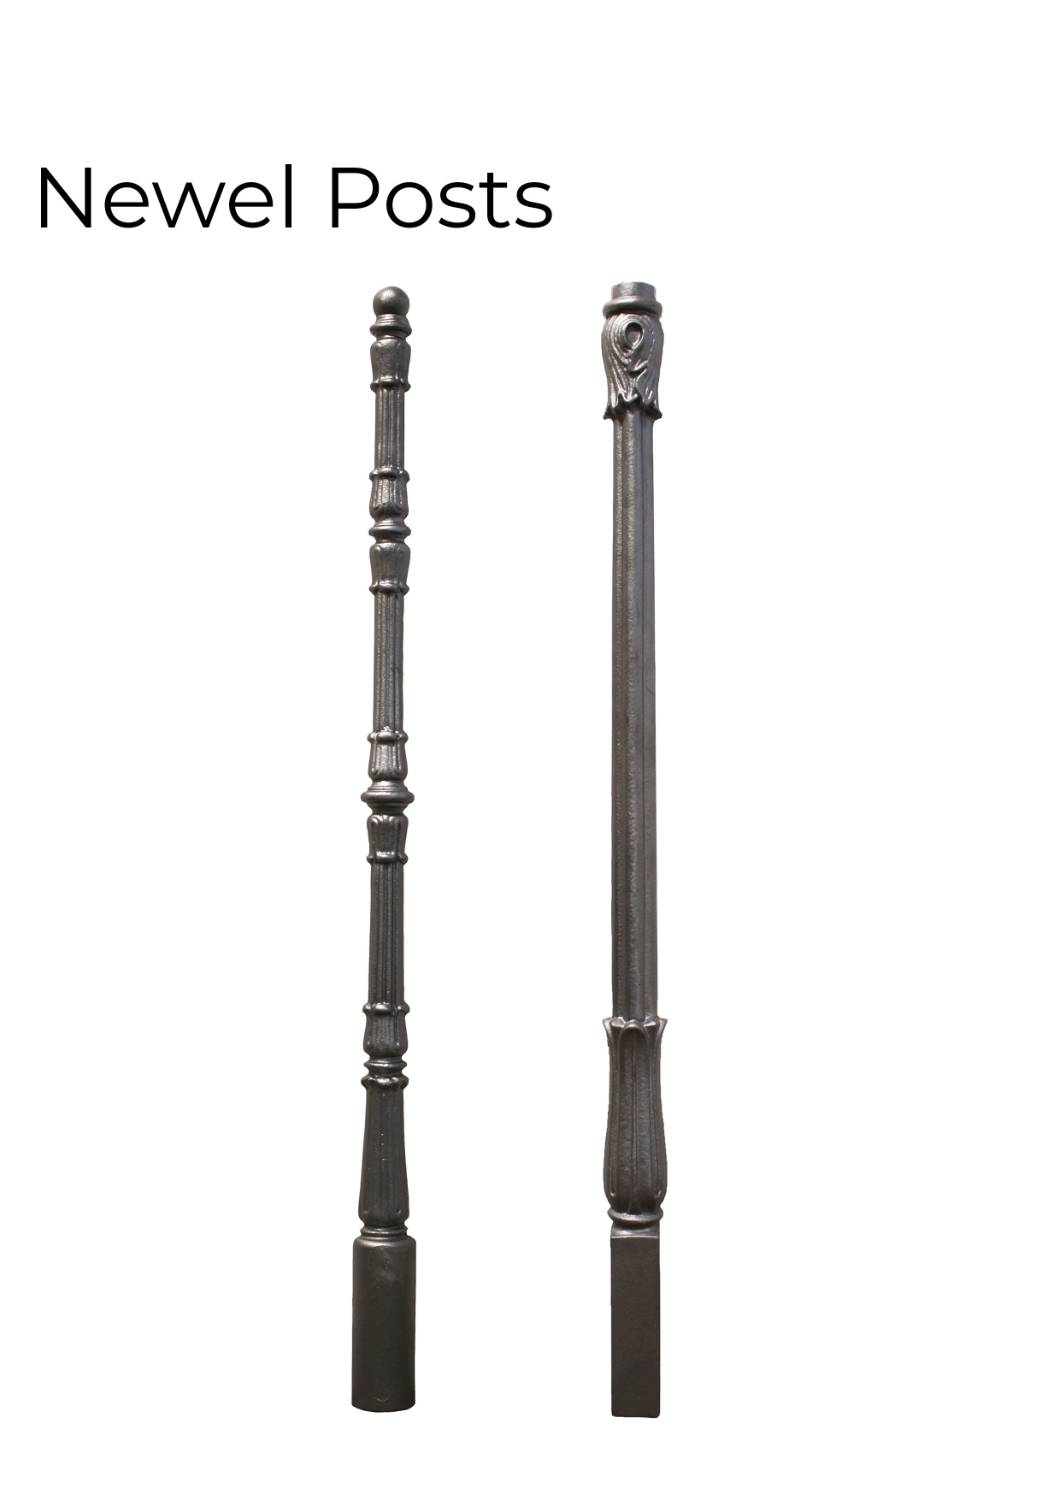 Newel Posts - cast iron and aluminium, and fabricated steel. Contemporary and traditional patterns and bespoke designs.